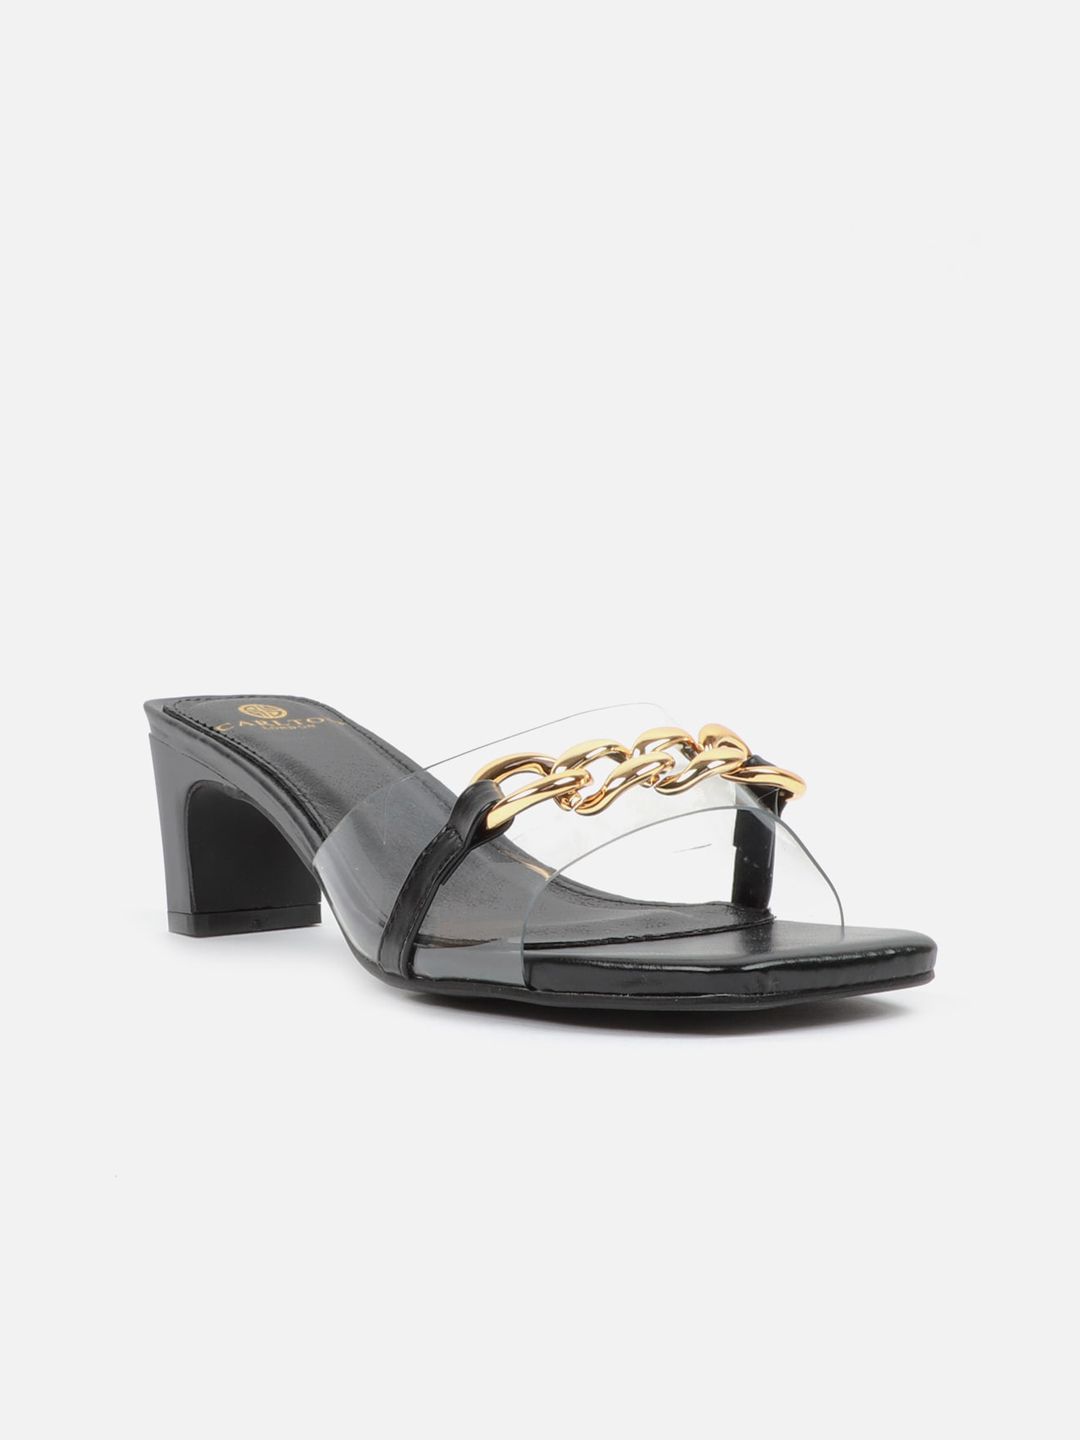 Carlton London Black Block Sandals with Bows Price in India